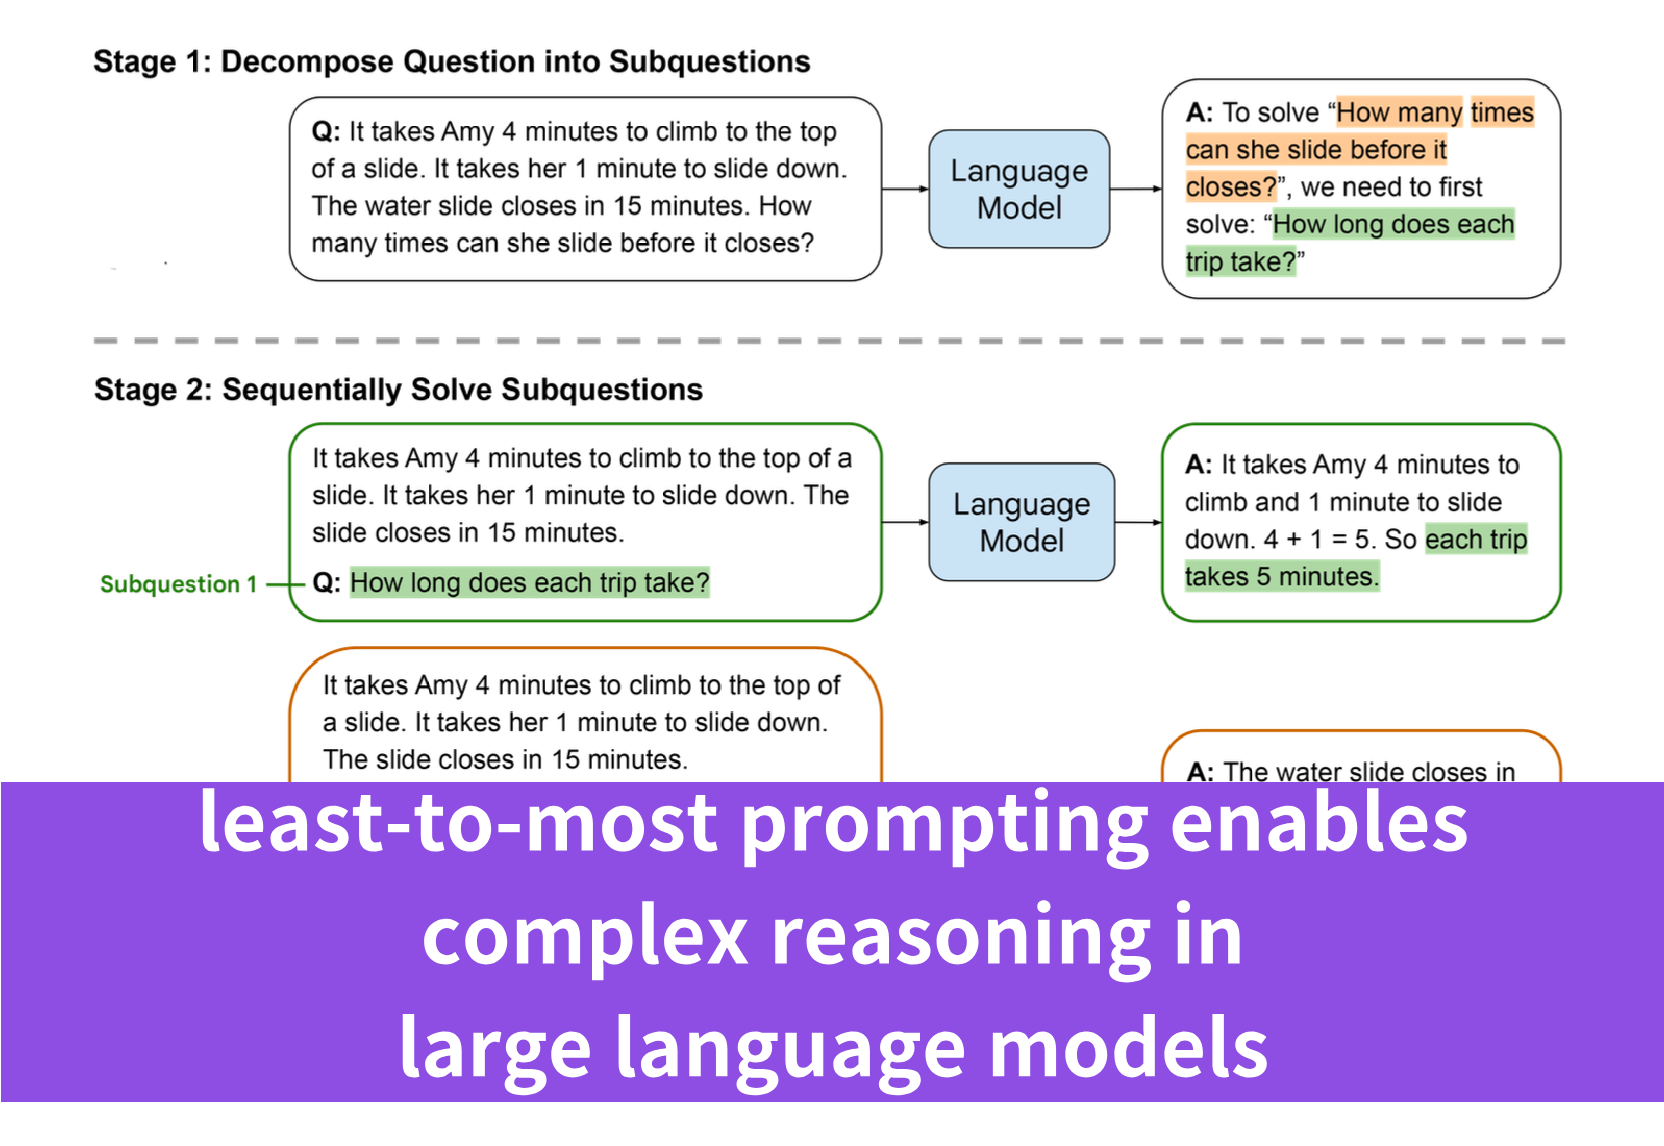 How Can Least-to-Most Prompting Enable Complex Reasoning in LLMs?